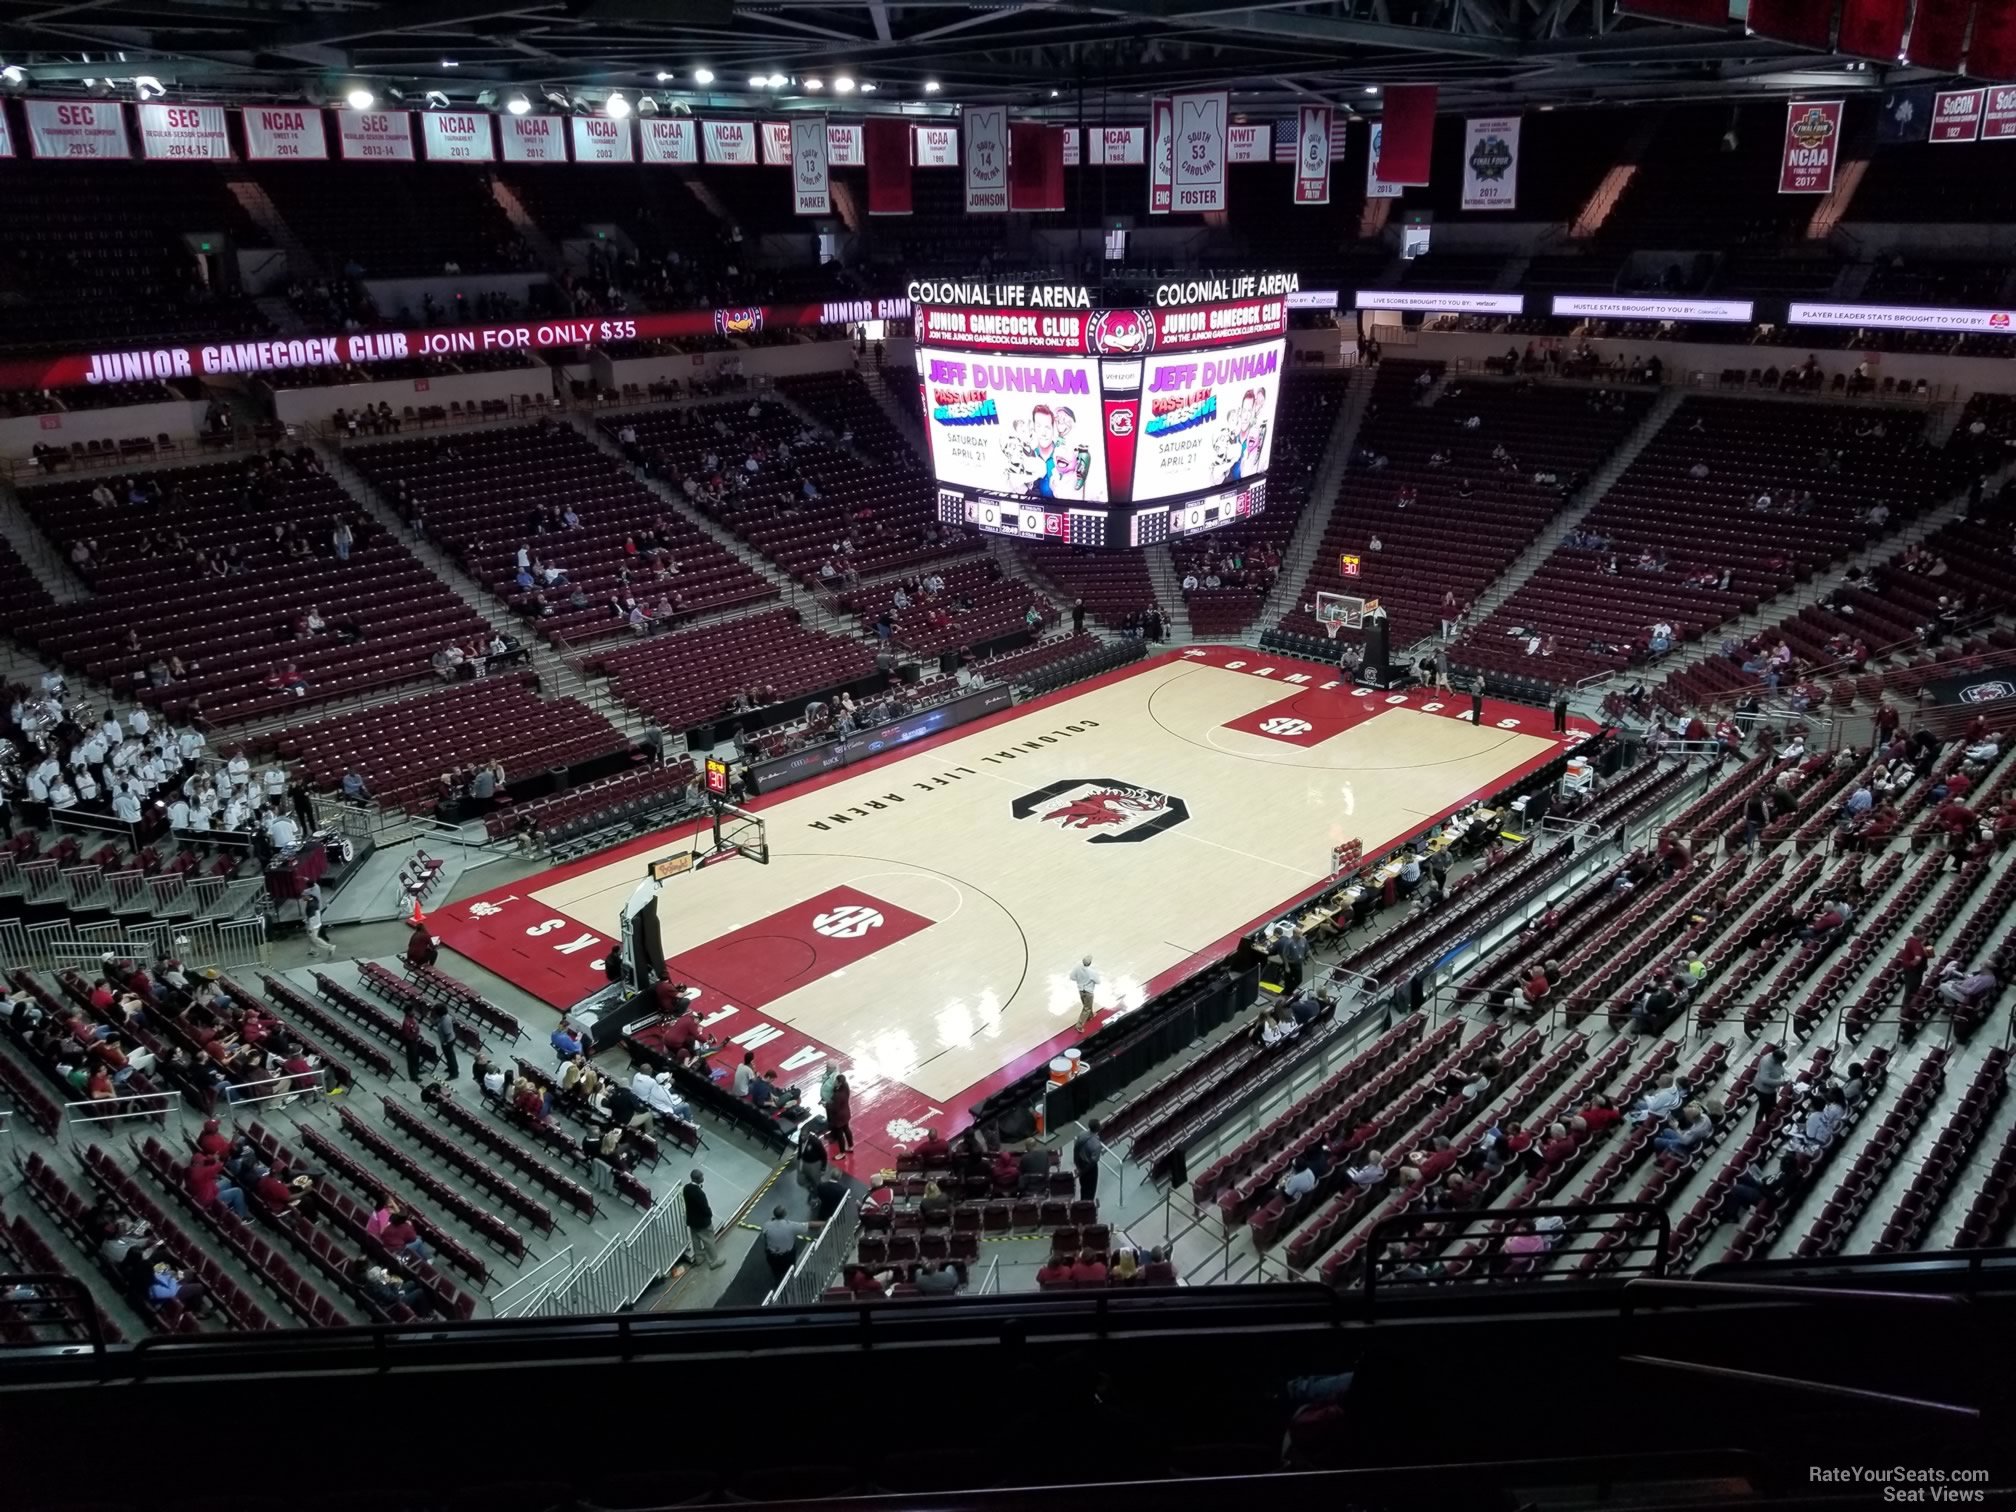 section 212, row 7 seat view  for basketball - colonial life arena